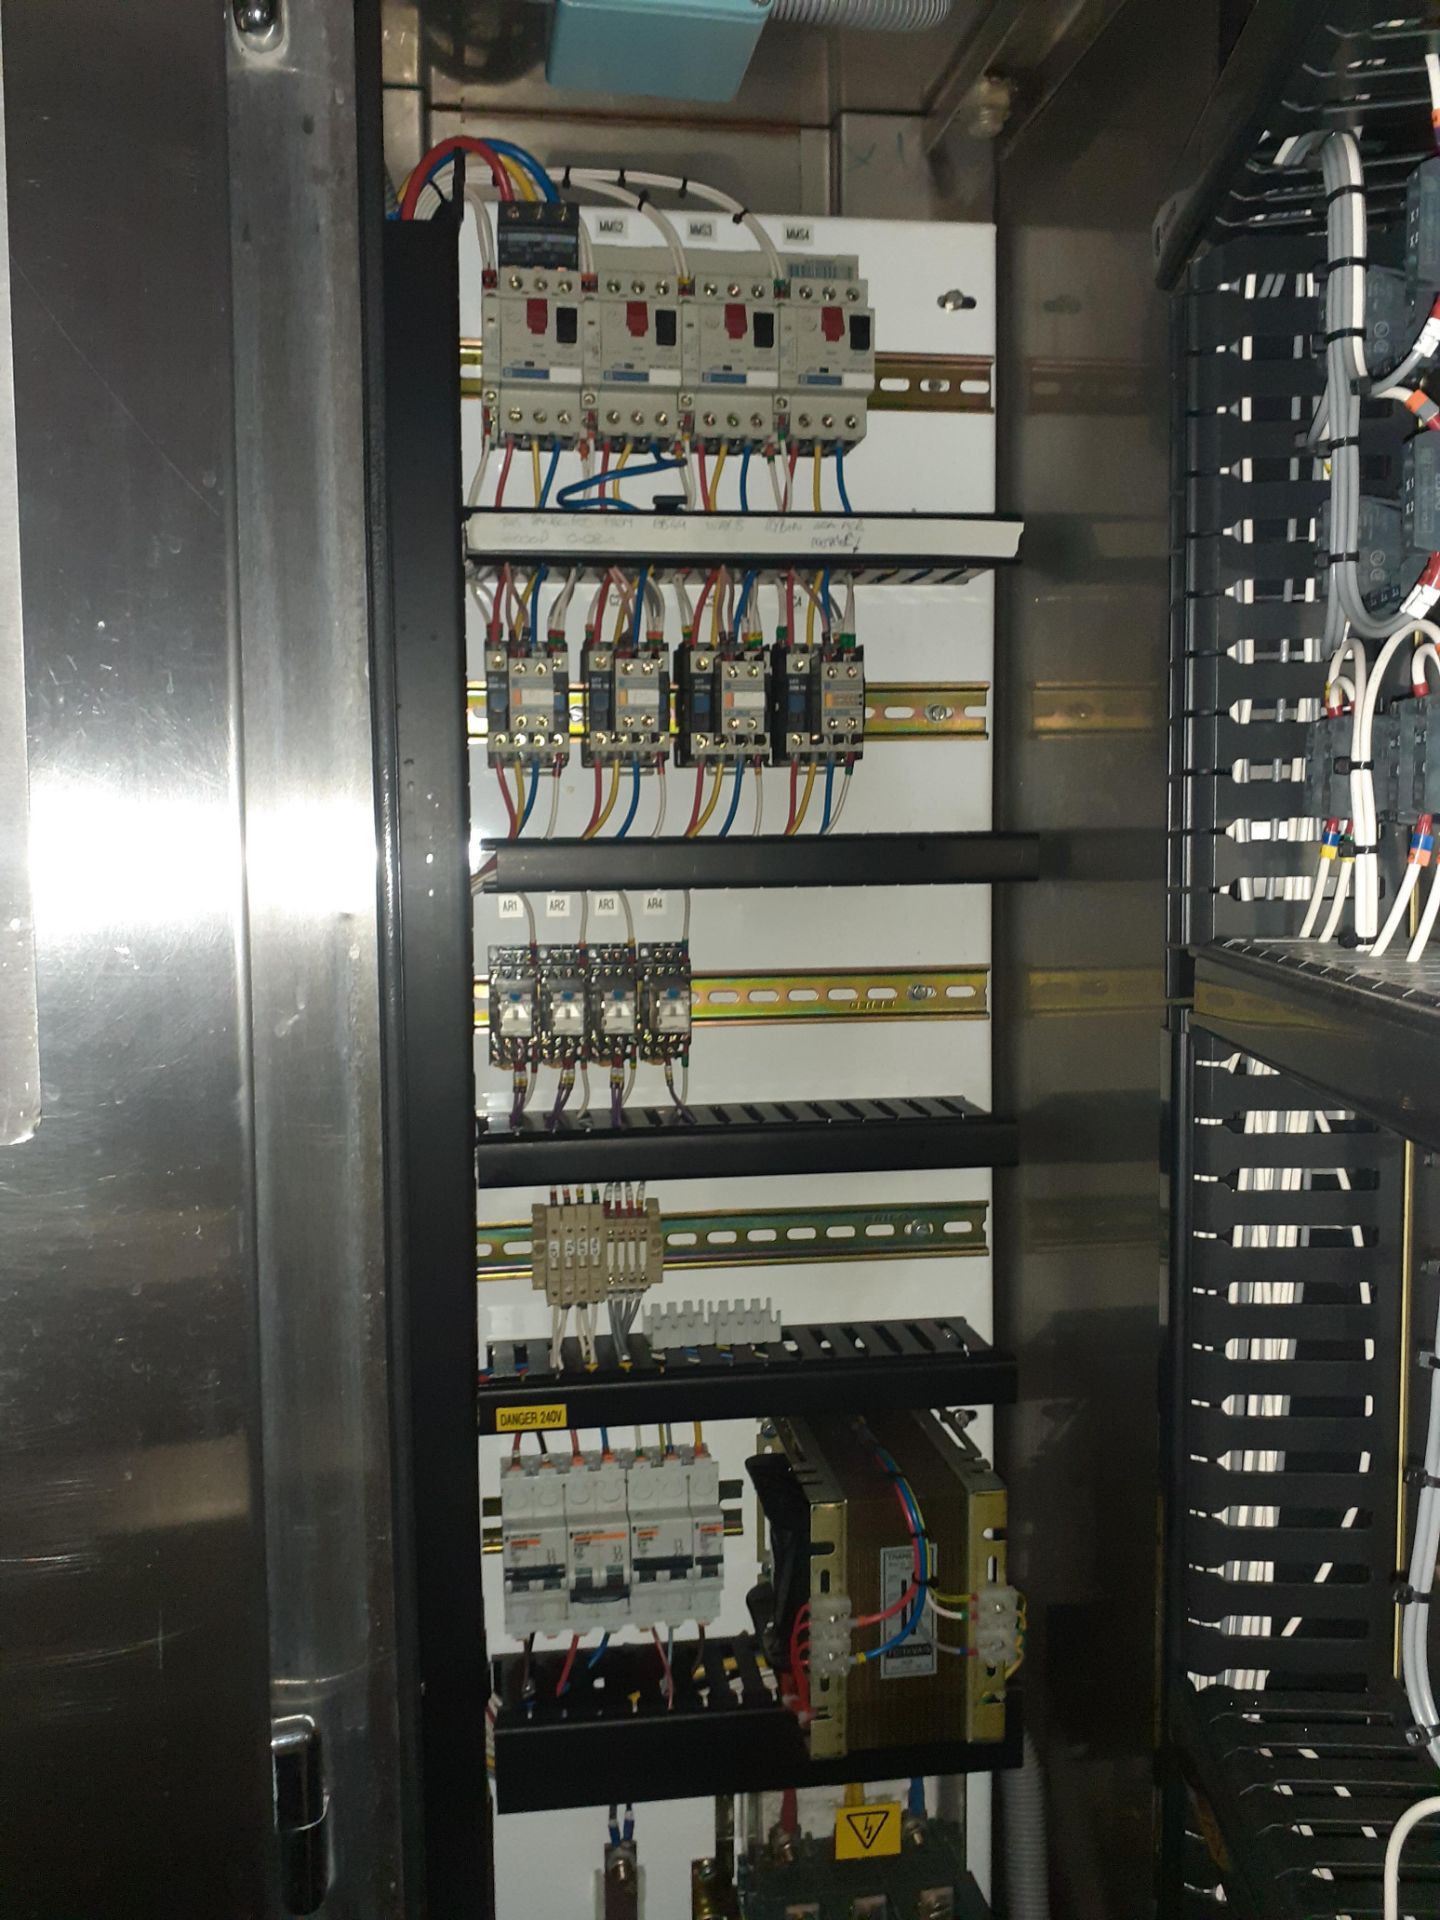 Tetra Pak Stainless Steel Control Panel - Image 7 of 7